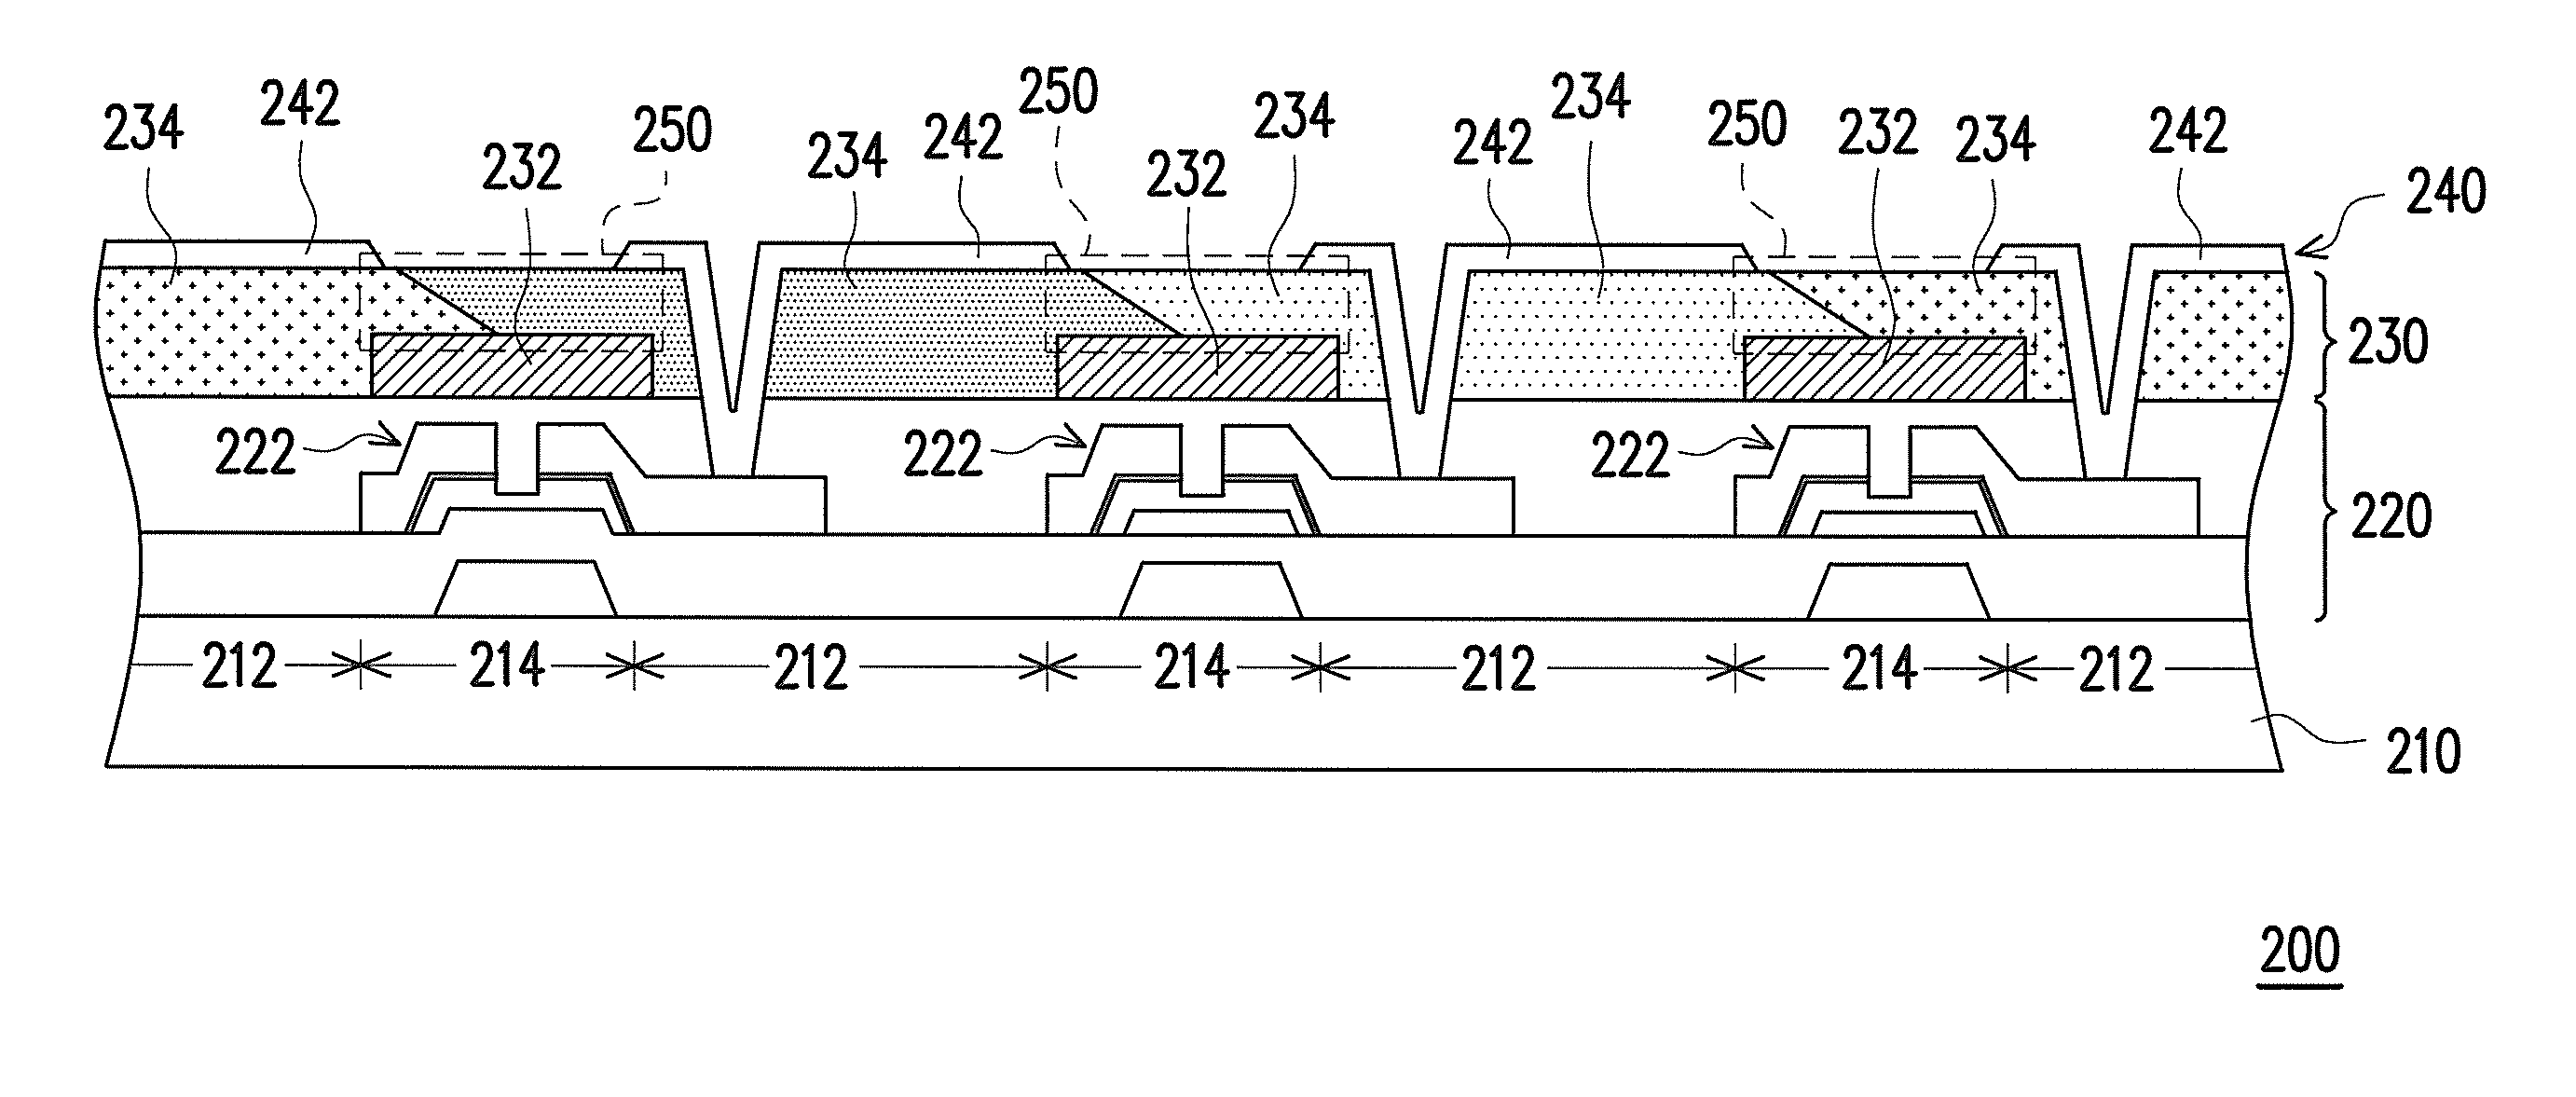 Color filter array on pixel array substrate and display panel